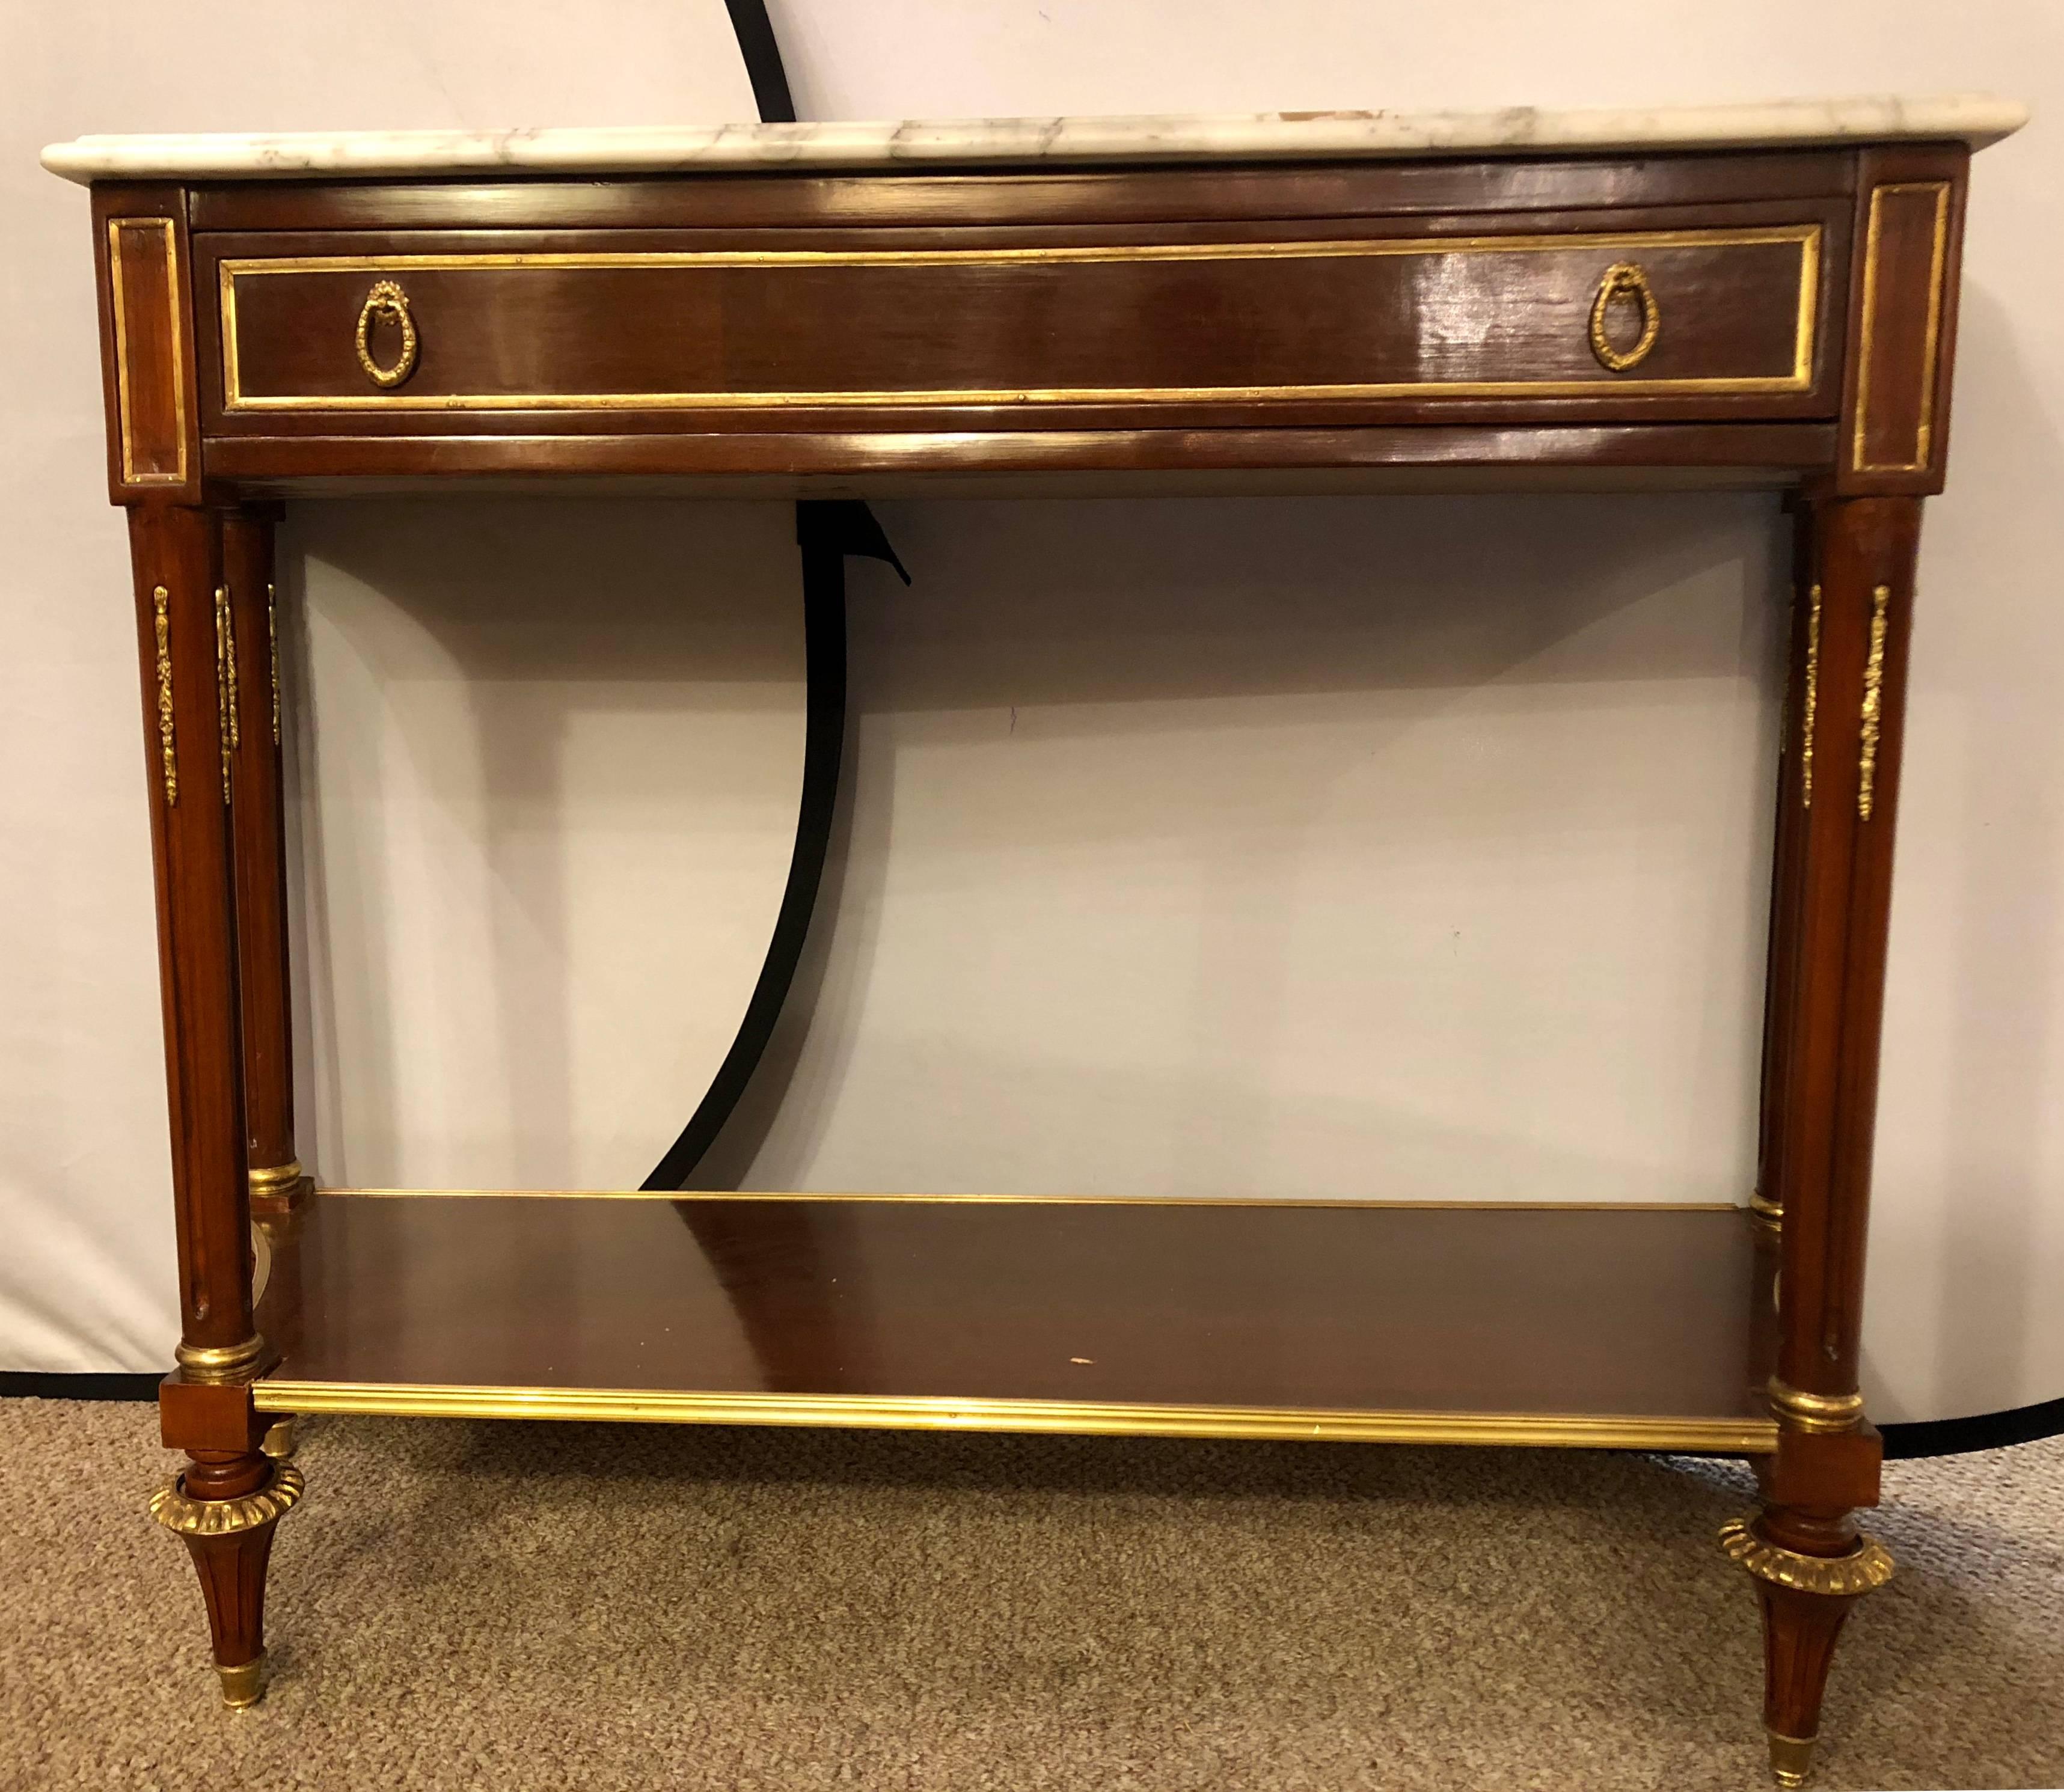 Pair of mahogany marble-top consoles with inverted sides and bronze framed lower shelves. This fine pair of custom quality Jansen inspired console tables in the Russian neoclassical manner have a lower shelf with bronze framing supported by a set of